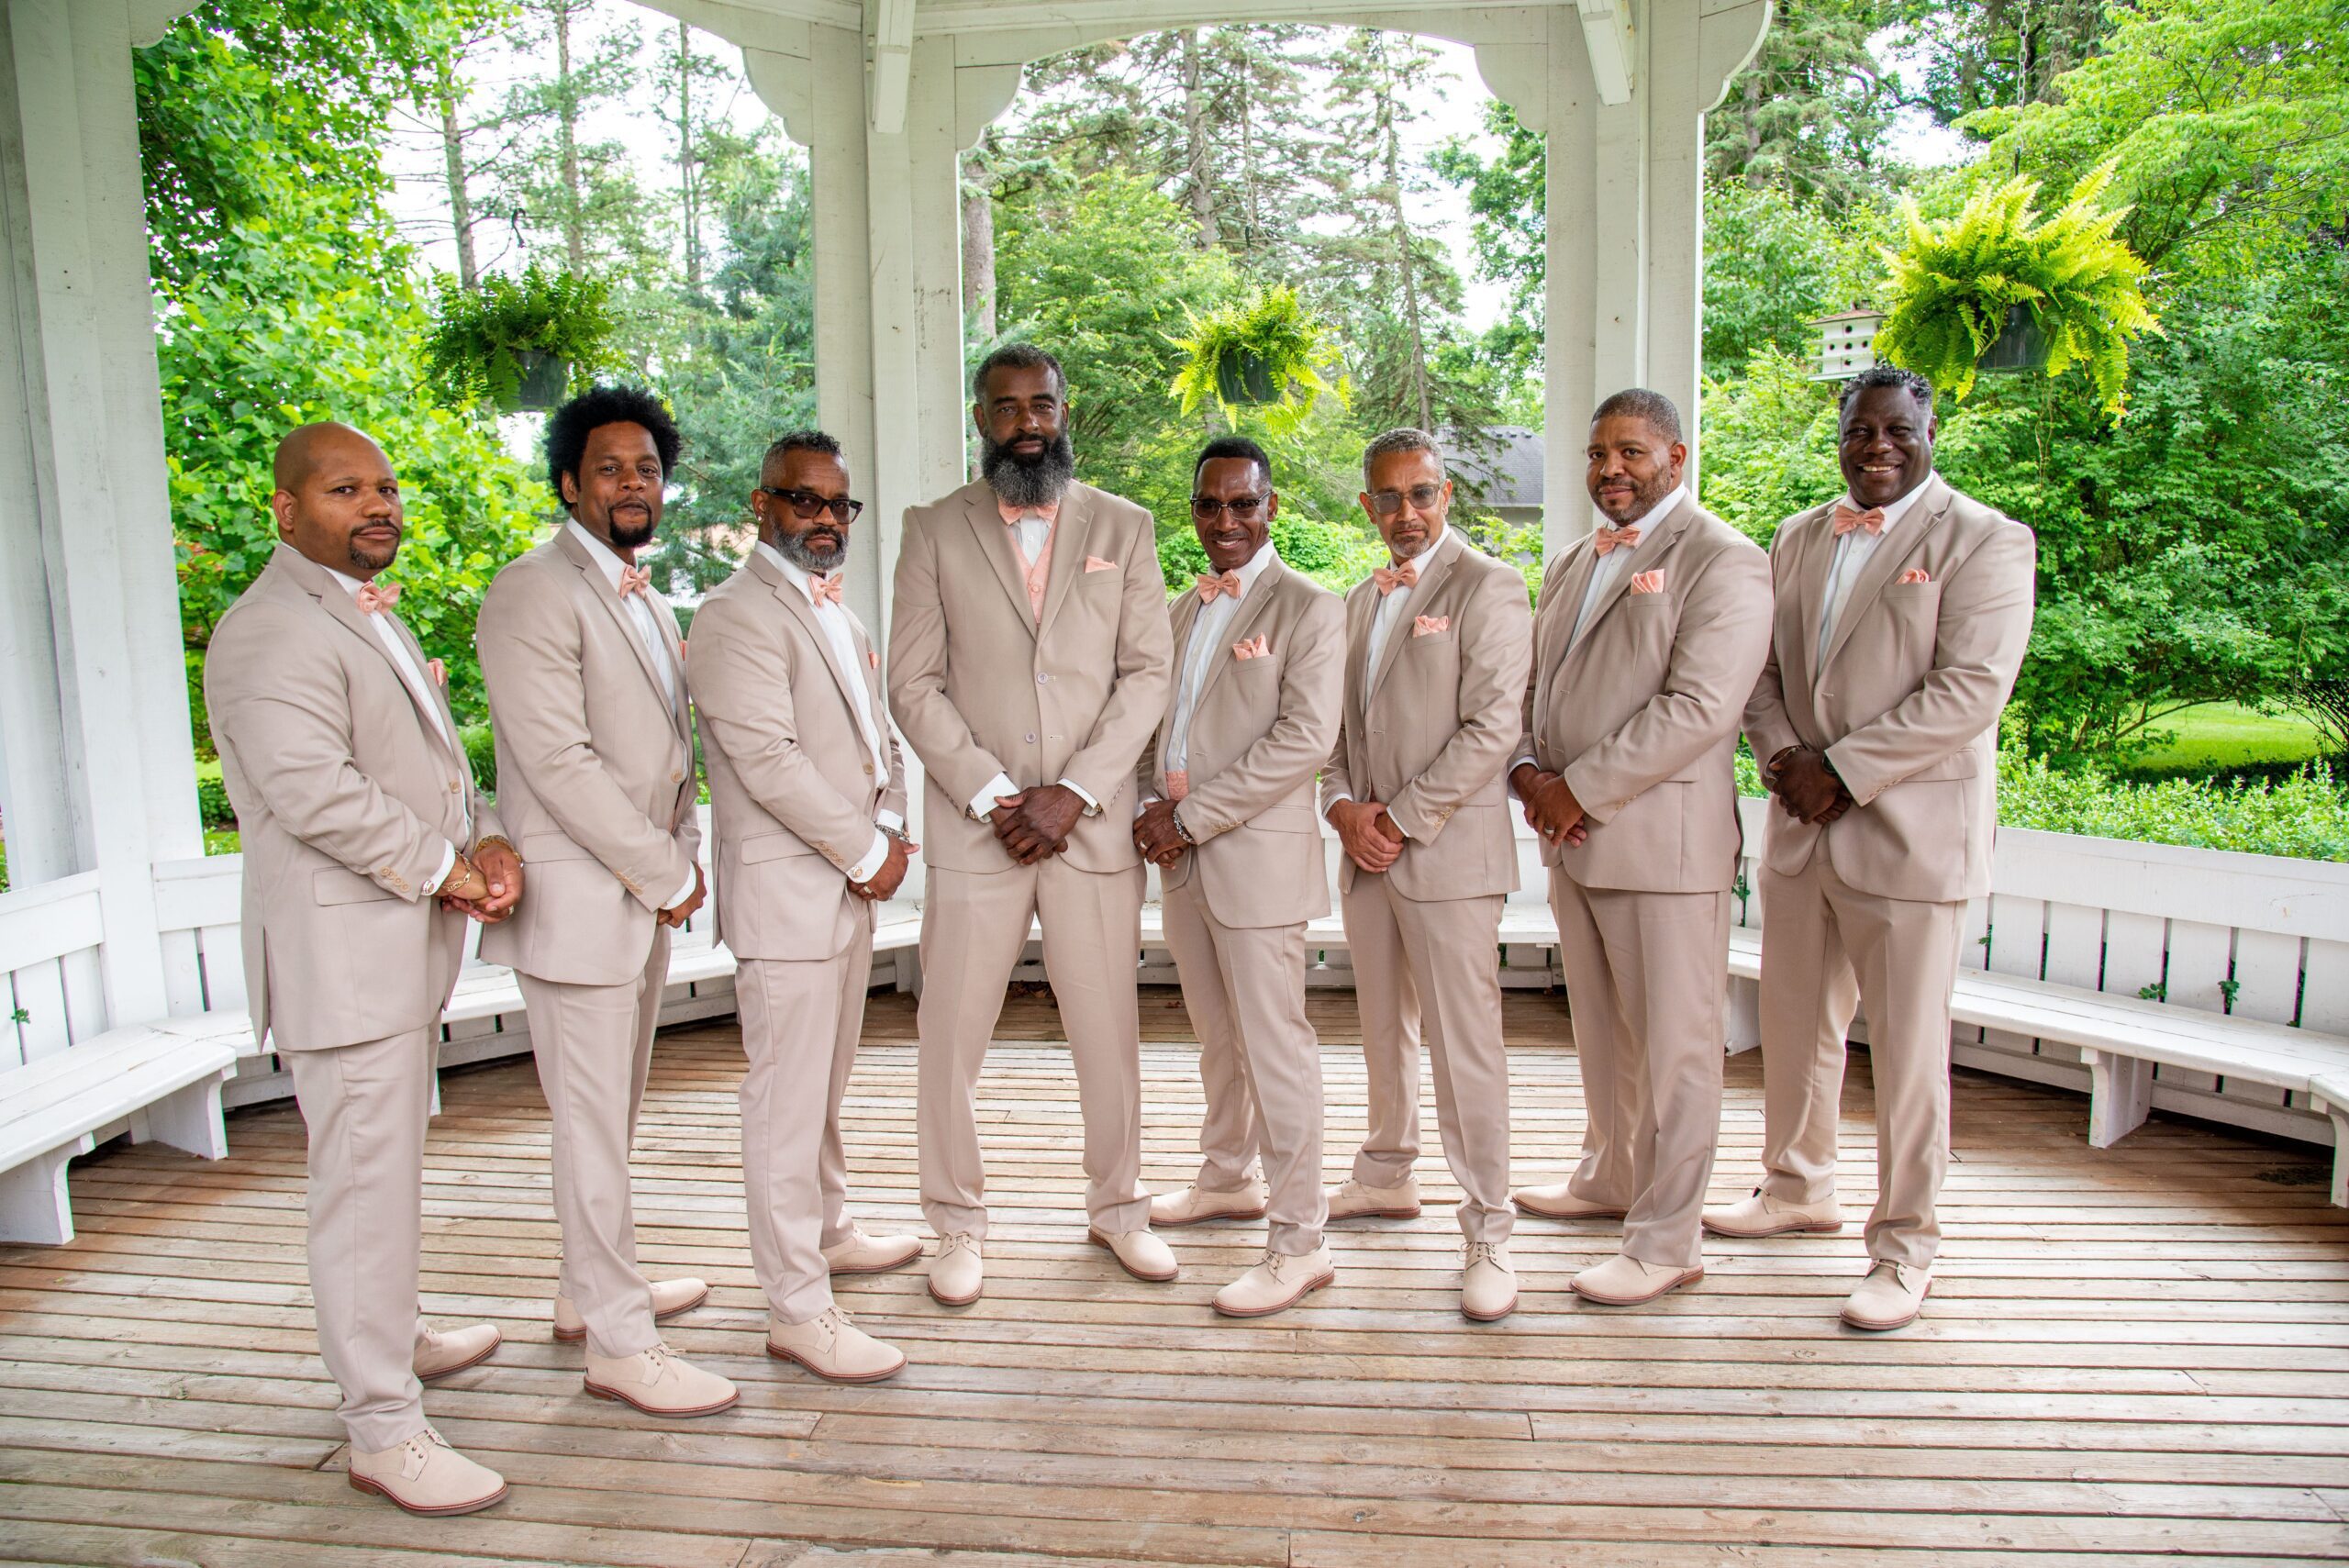 Wedding party in tan suits